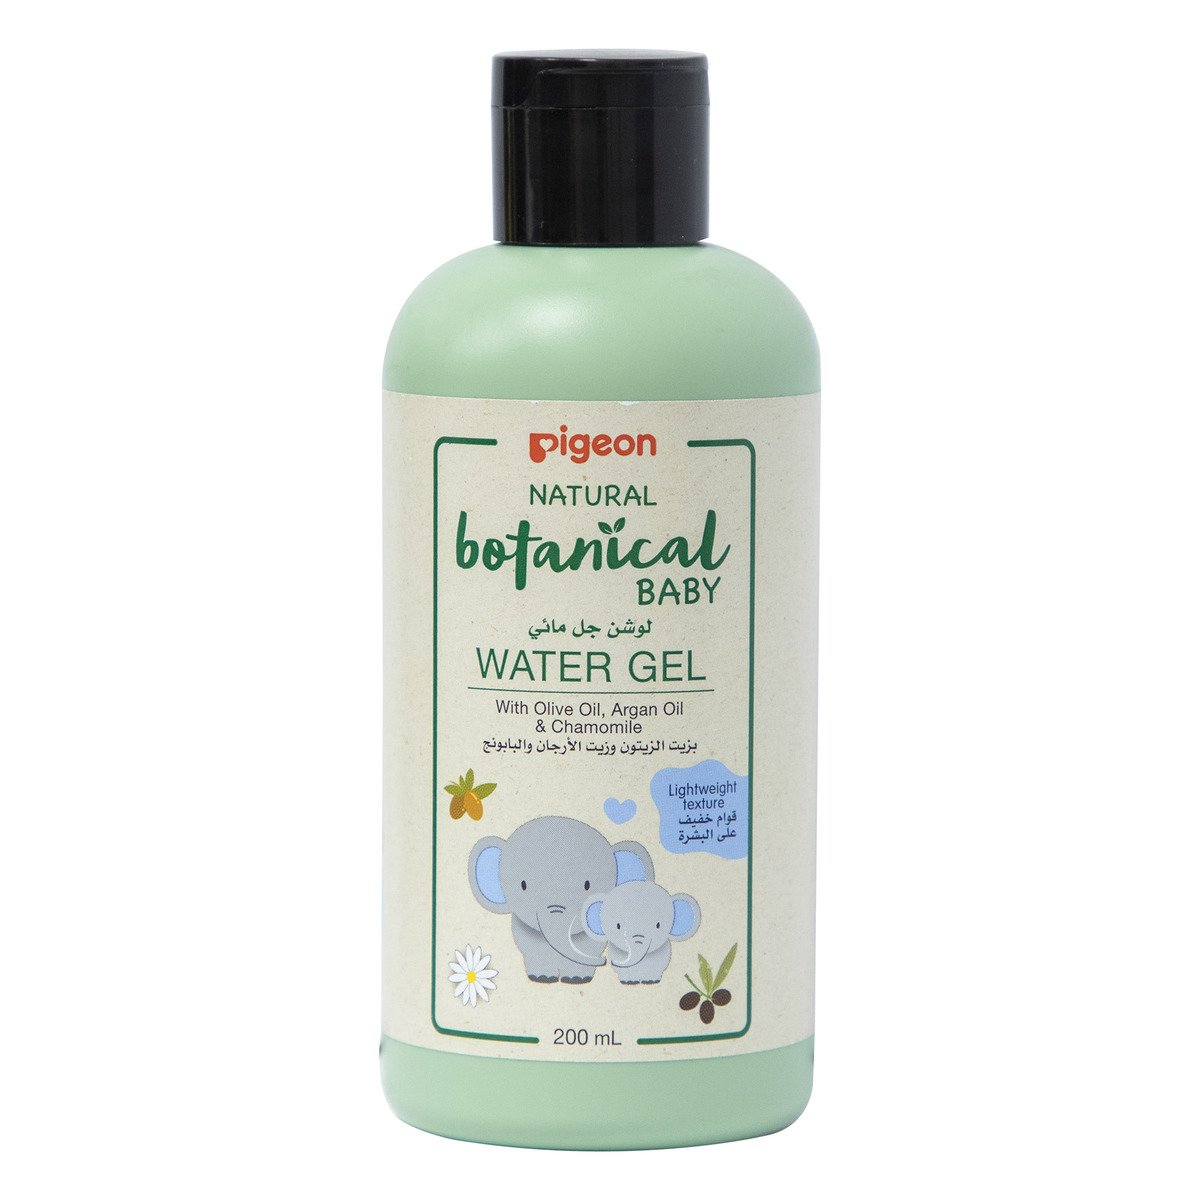 Pigeon Natural Botanical Baby Water Gel With Olive Oil , Argan Oil & Chamomile 200ml